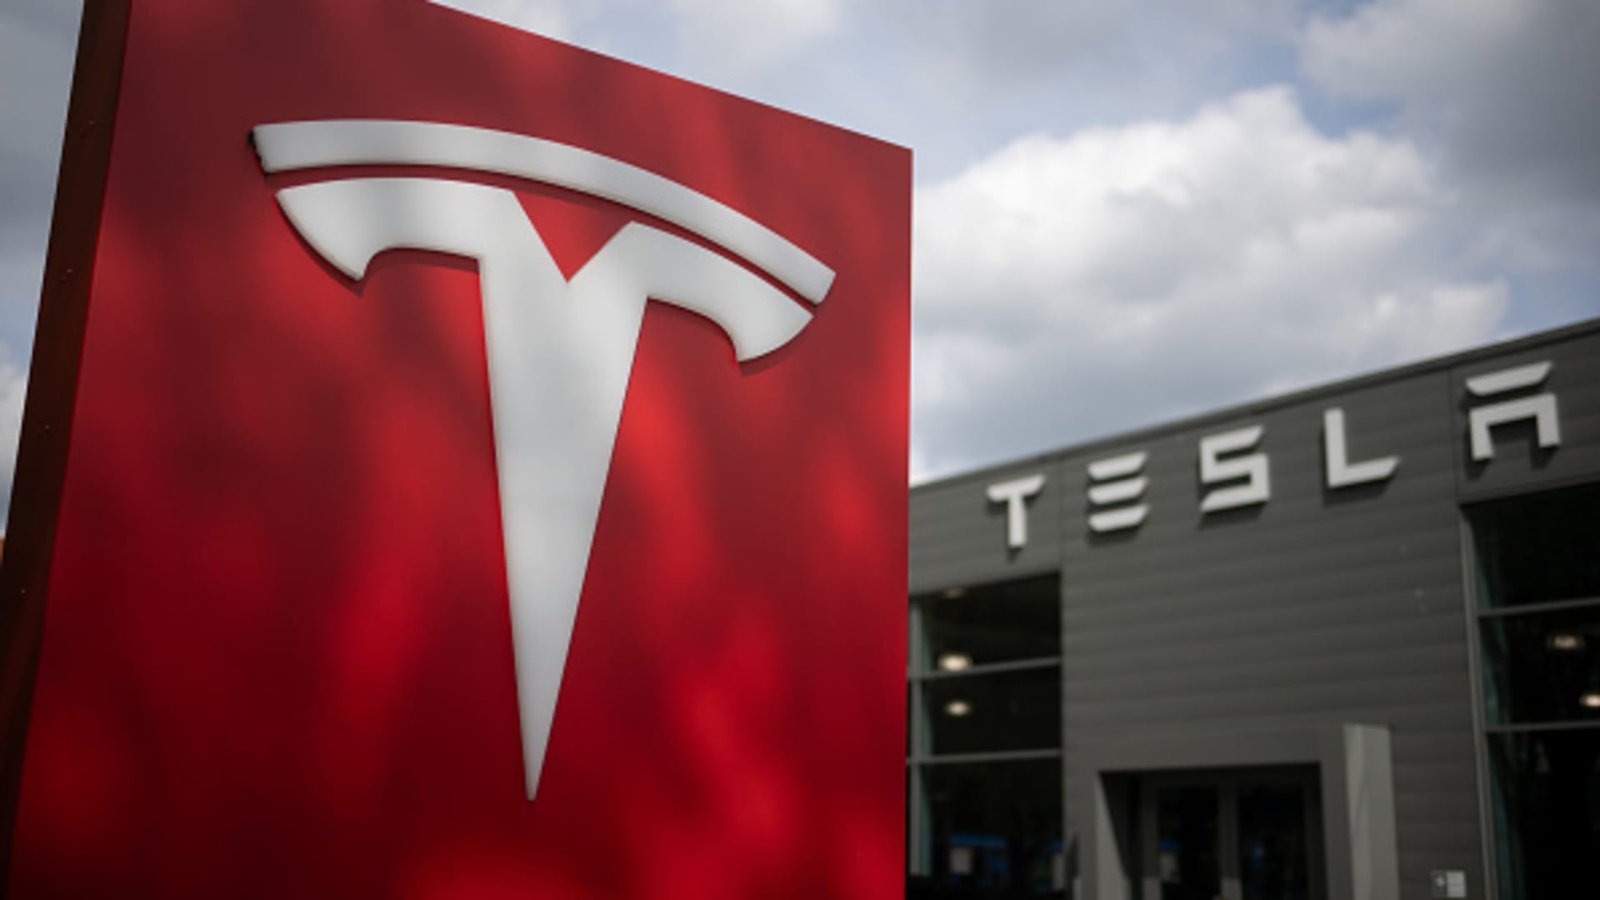 Jim Cramer says Tesla soared on a brief squeeze, questions ServiceNow promote name